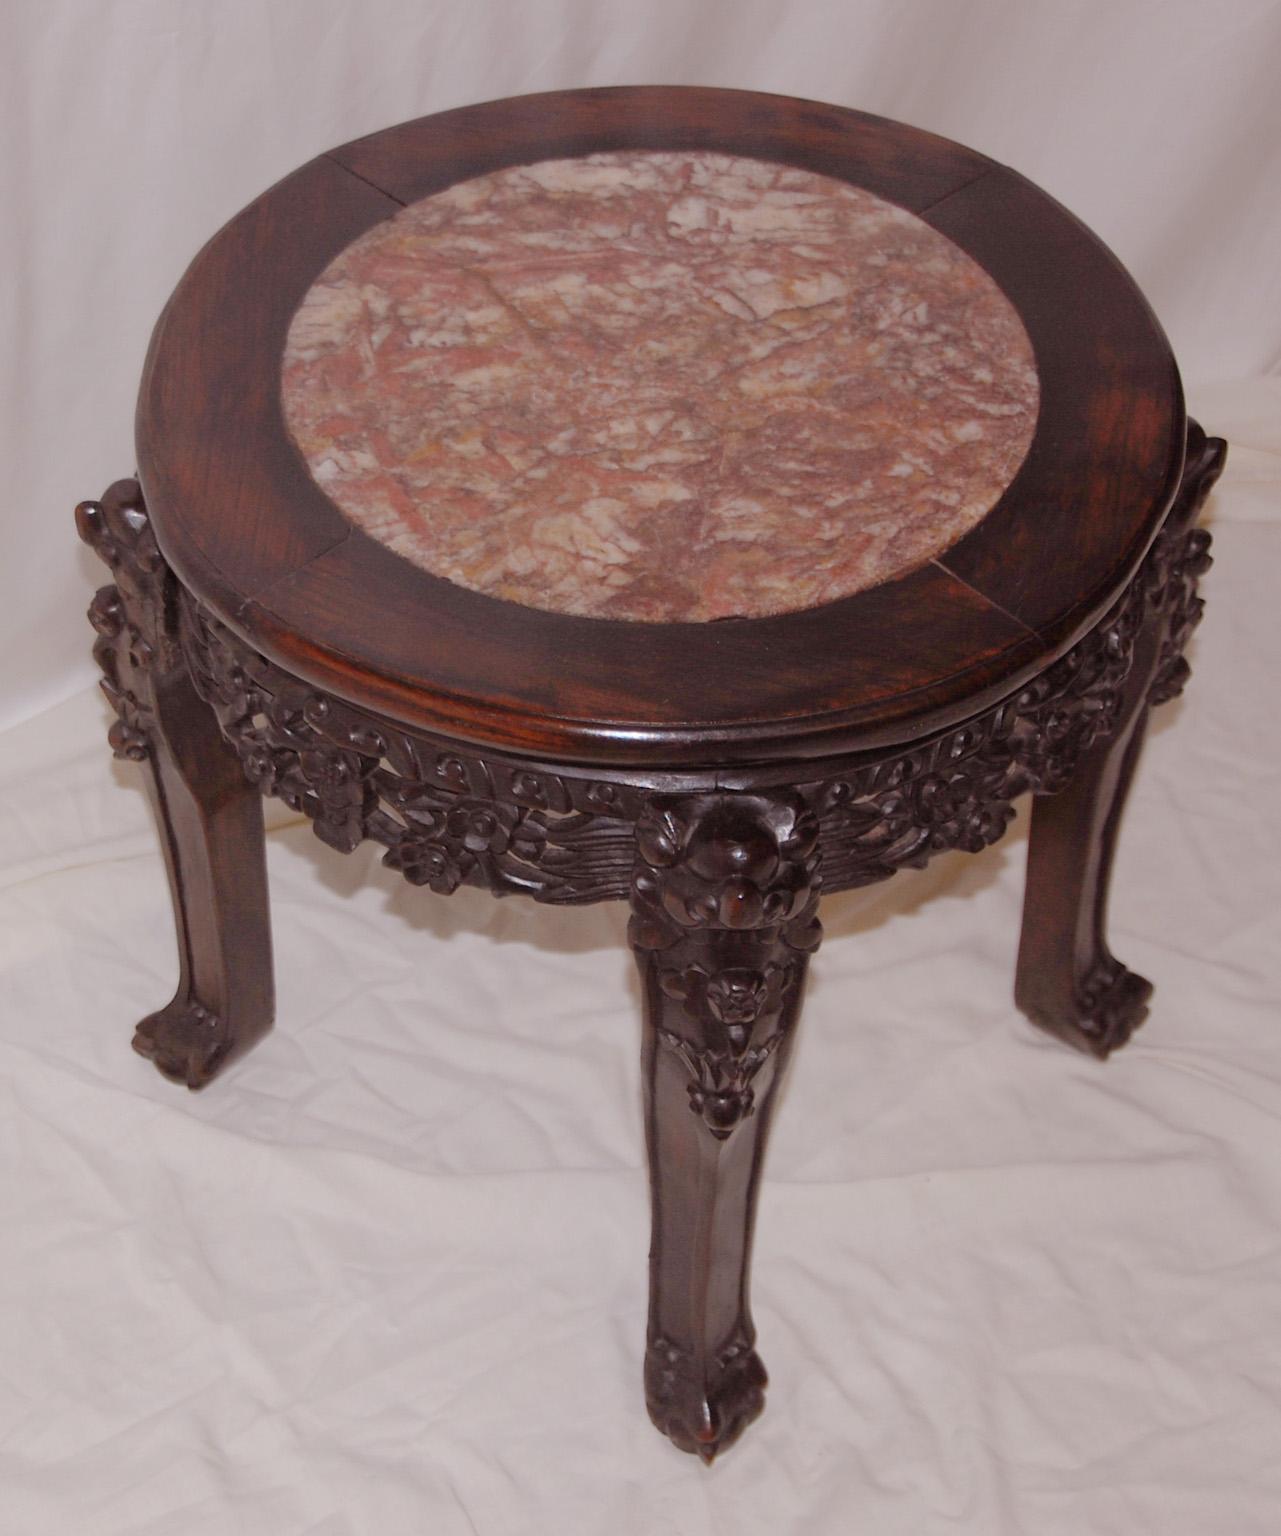 Chinese Qing Dynasty Rosewood Carved Stool with Rose Marble Inlaid Seat In Good Condition For Sale In Wells, ME